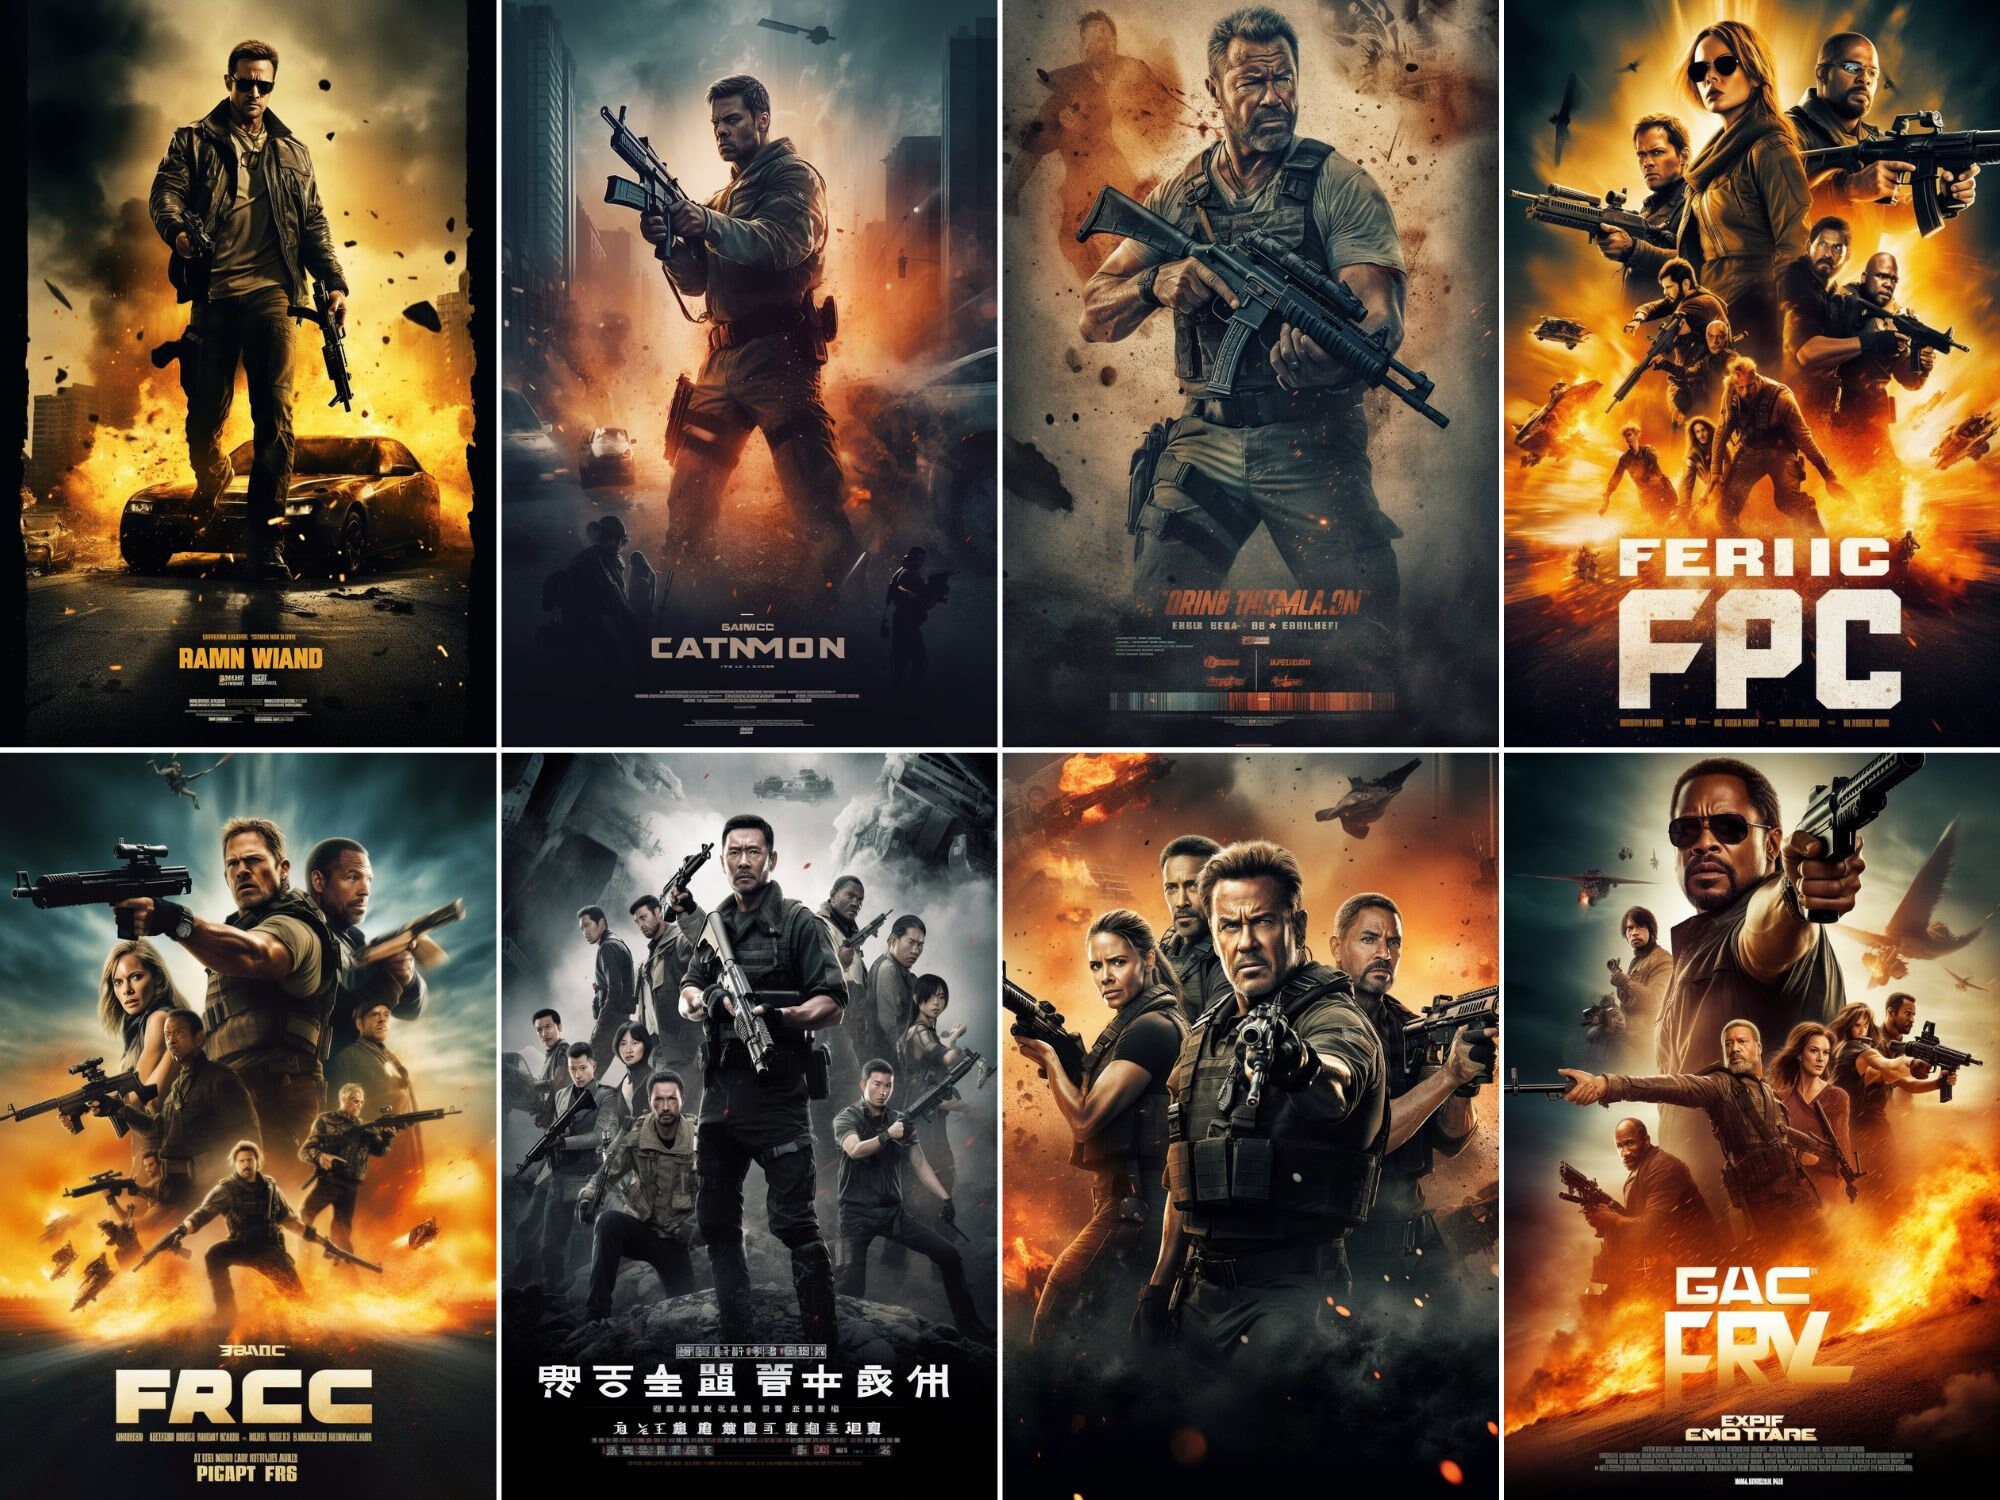 Movie posters, Action movie poster, Movies